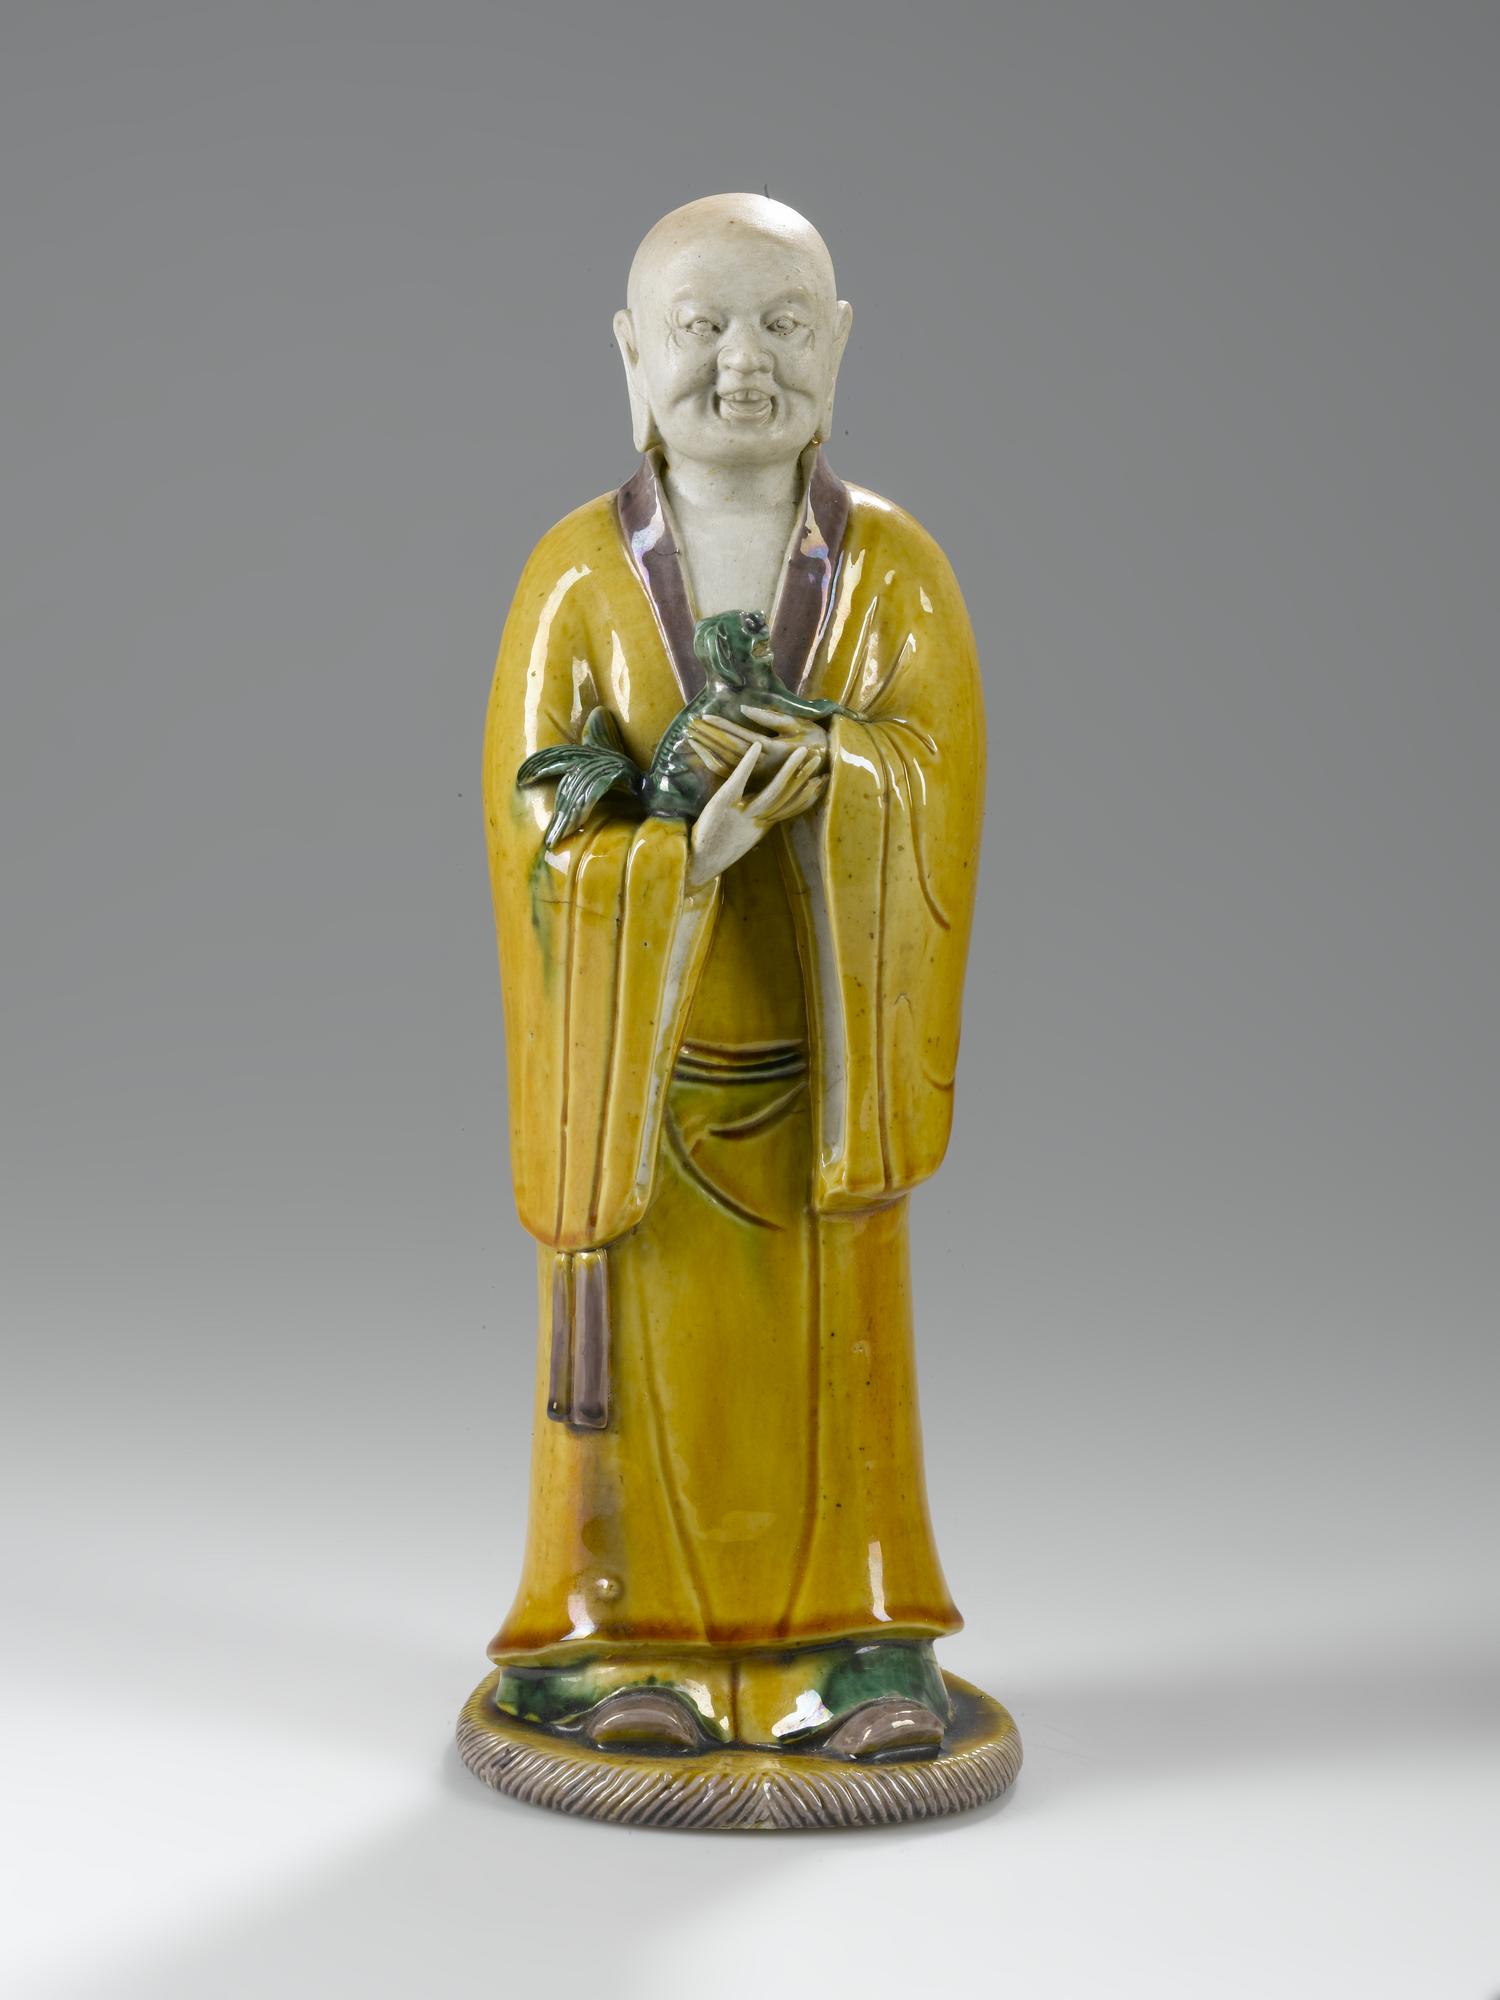 Figure of a luohan or Arhat, holding a lion cub in his arms in porcelain with sancai (three coloured) glazes, possibly Xiaoshi Luohan (Luohan with laughing Lion): China, Ming or Qing Dynasty, 16th - 18th century AD. 